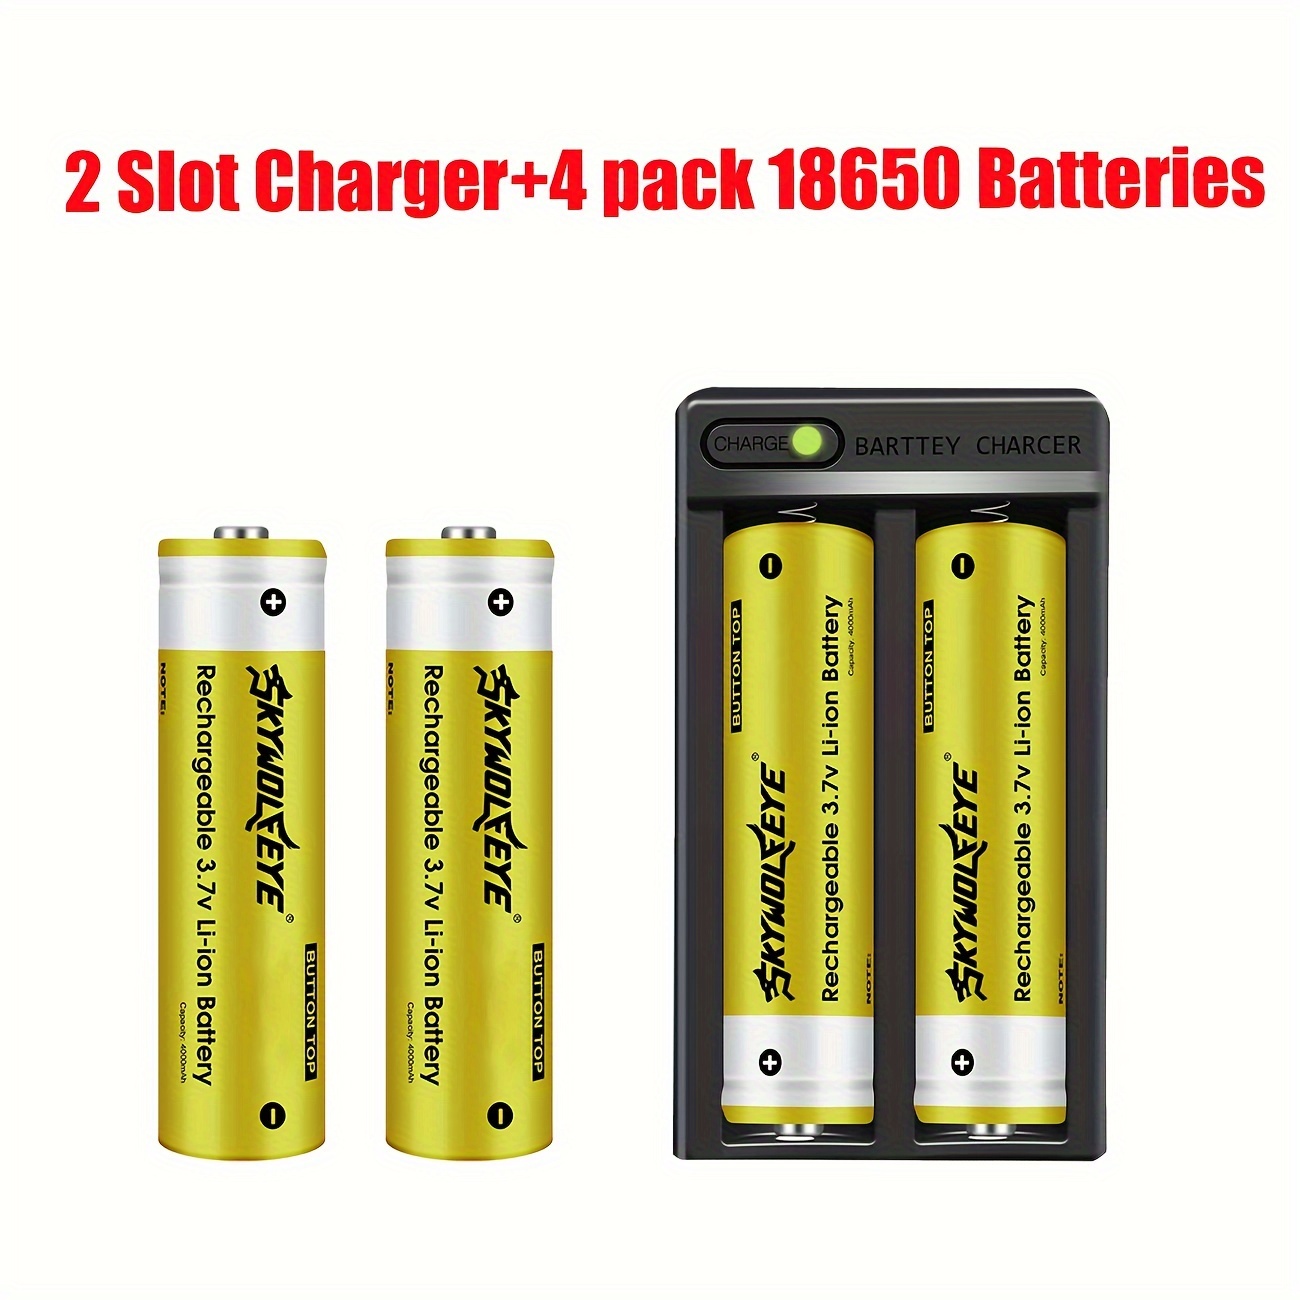 

4 Pack 18650 Rechargeable Battery, Button Top With 18650 Battery Charger, 18650 2-slot Smart Battery Charger For 3.7v Rechargeable Batteries